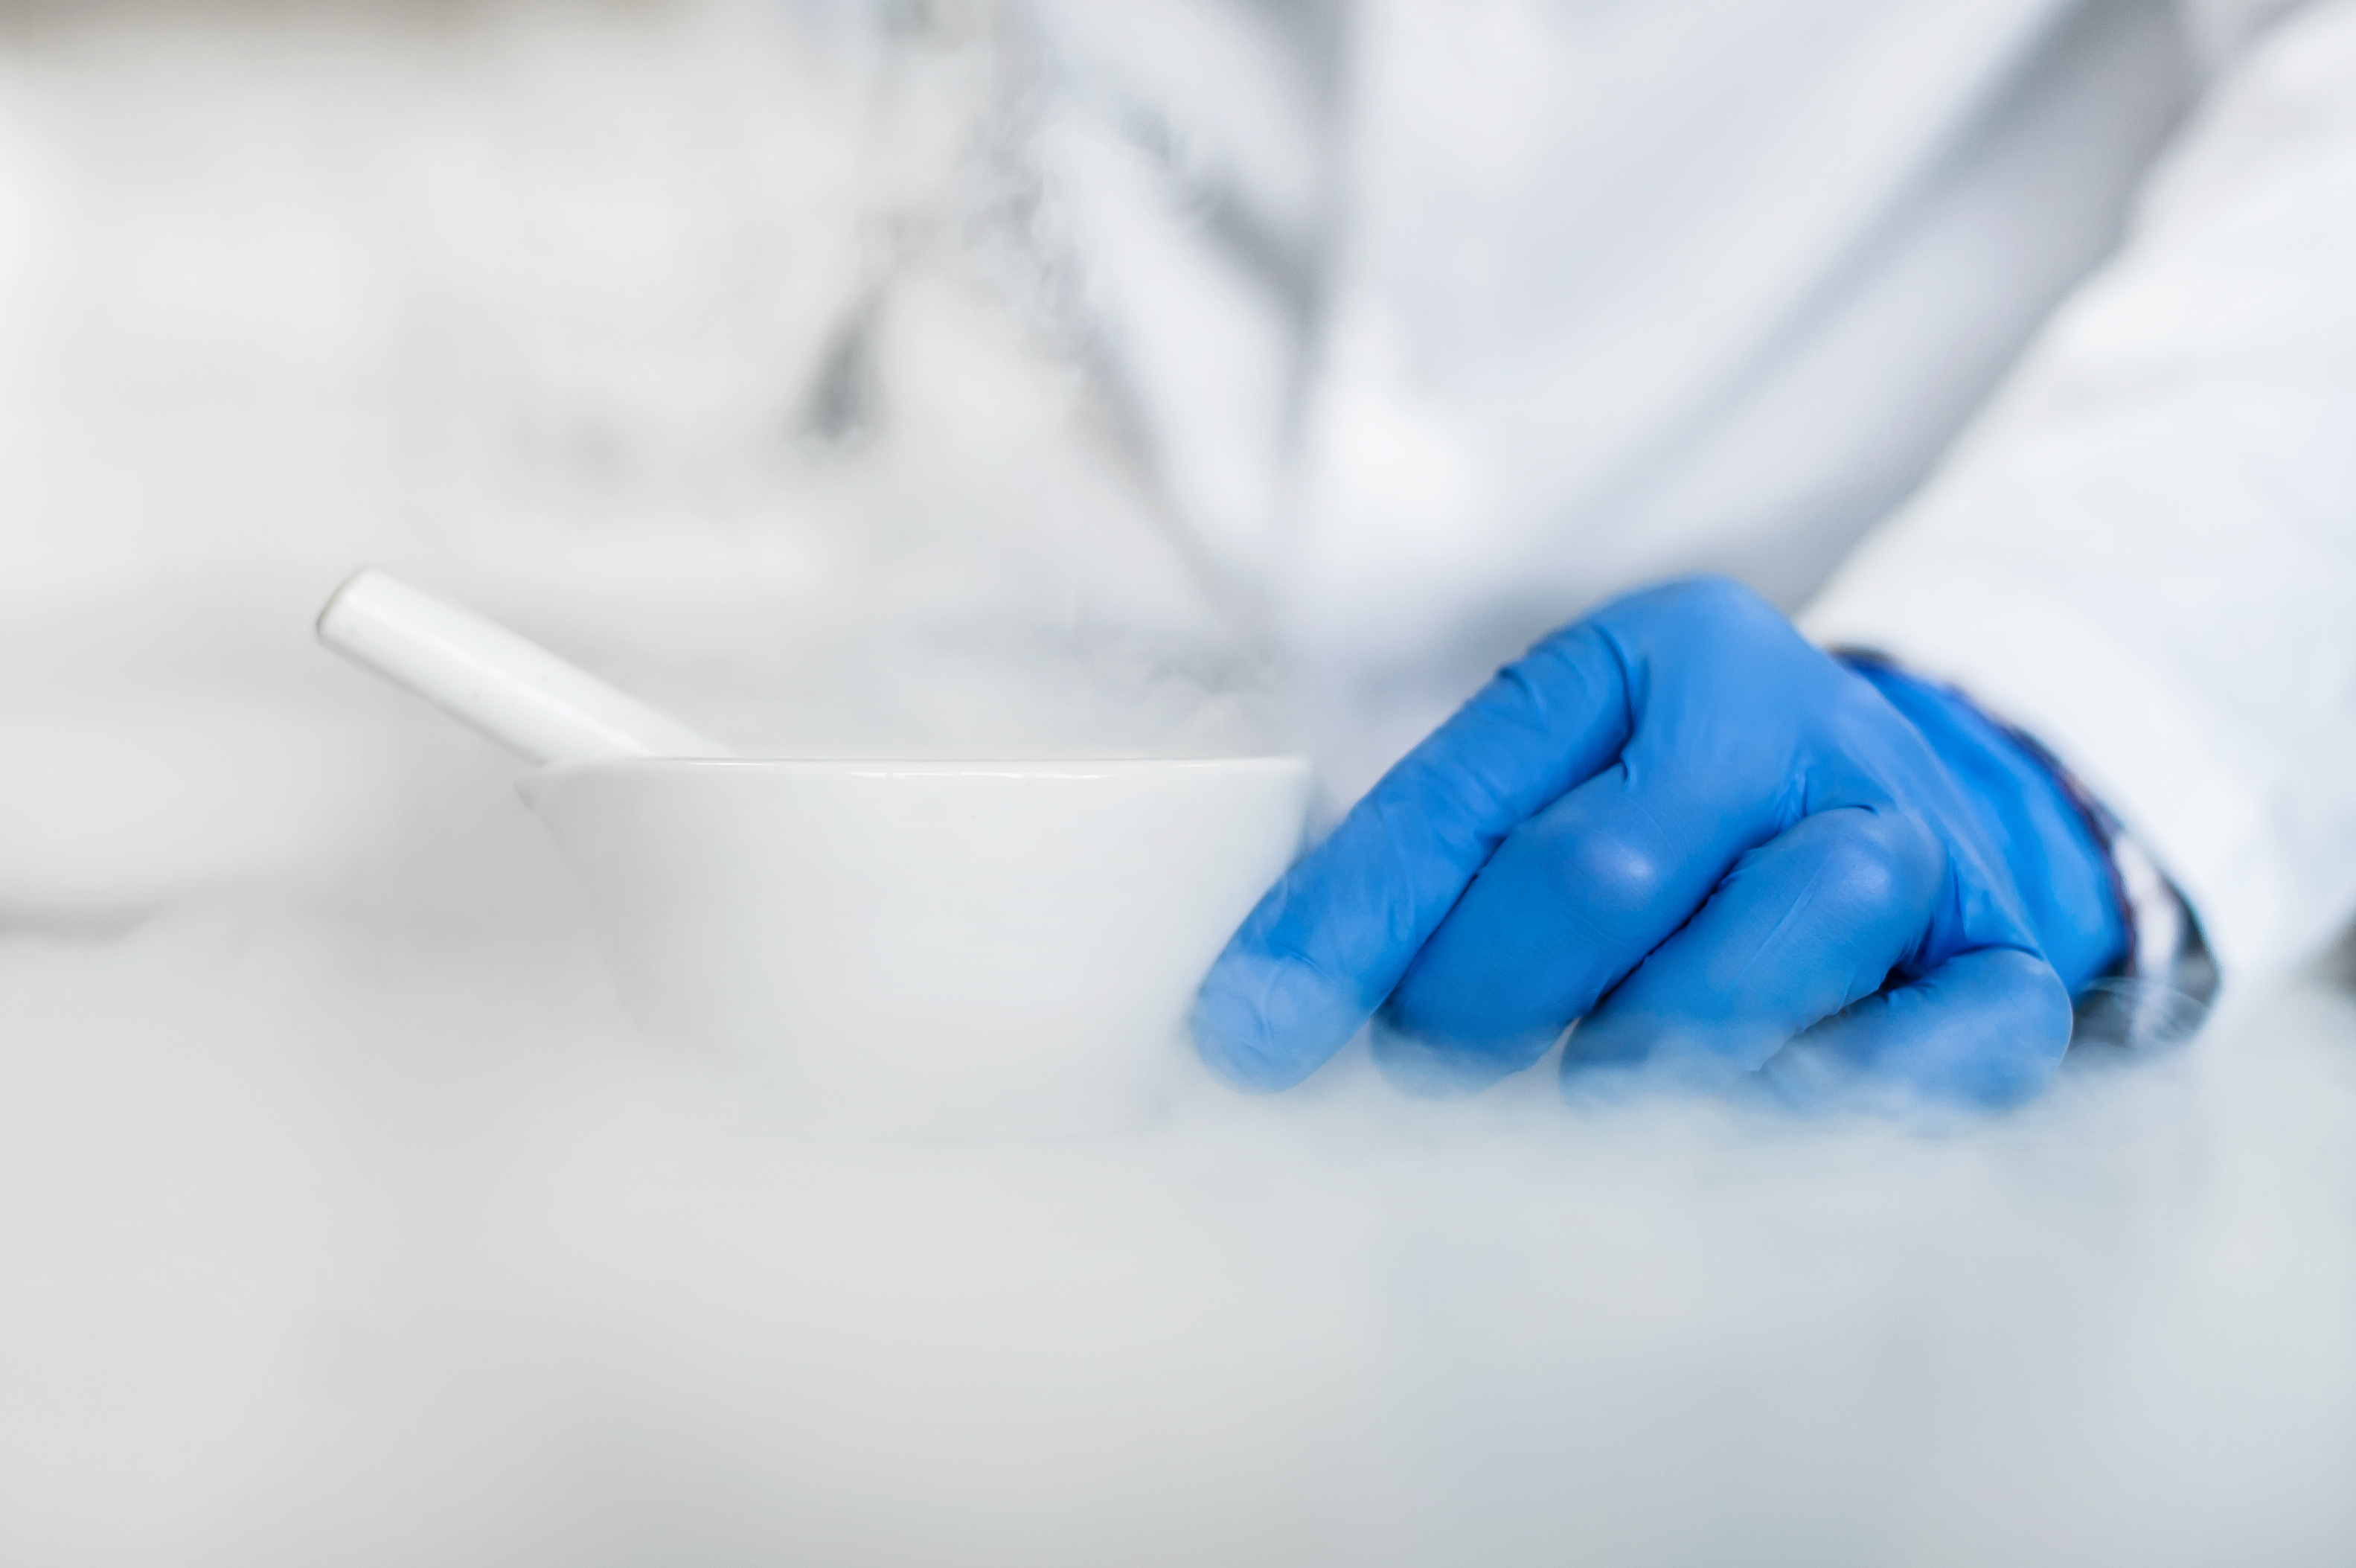 Liquid nitrogen is most commonly used in cryogenics